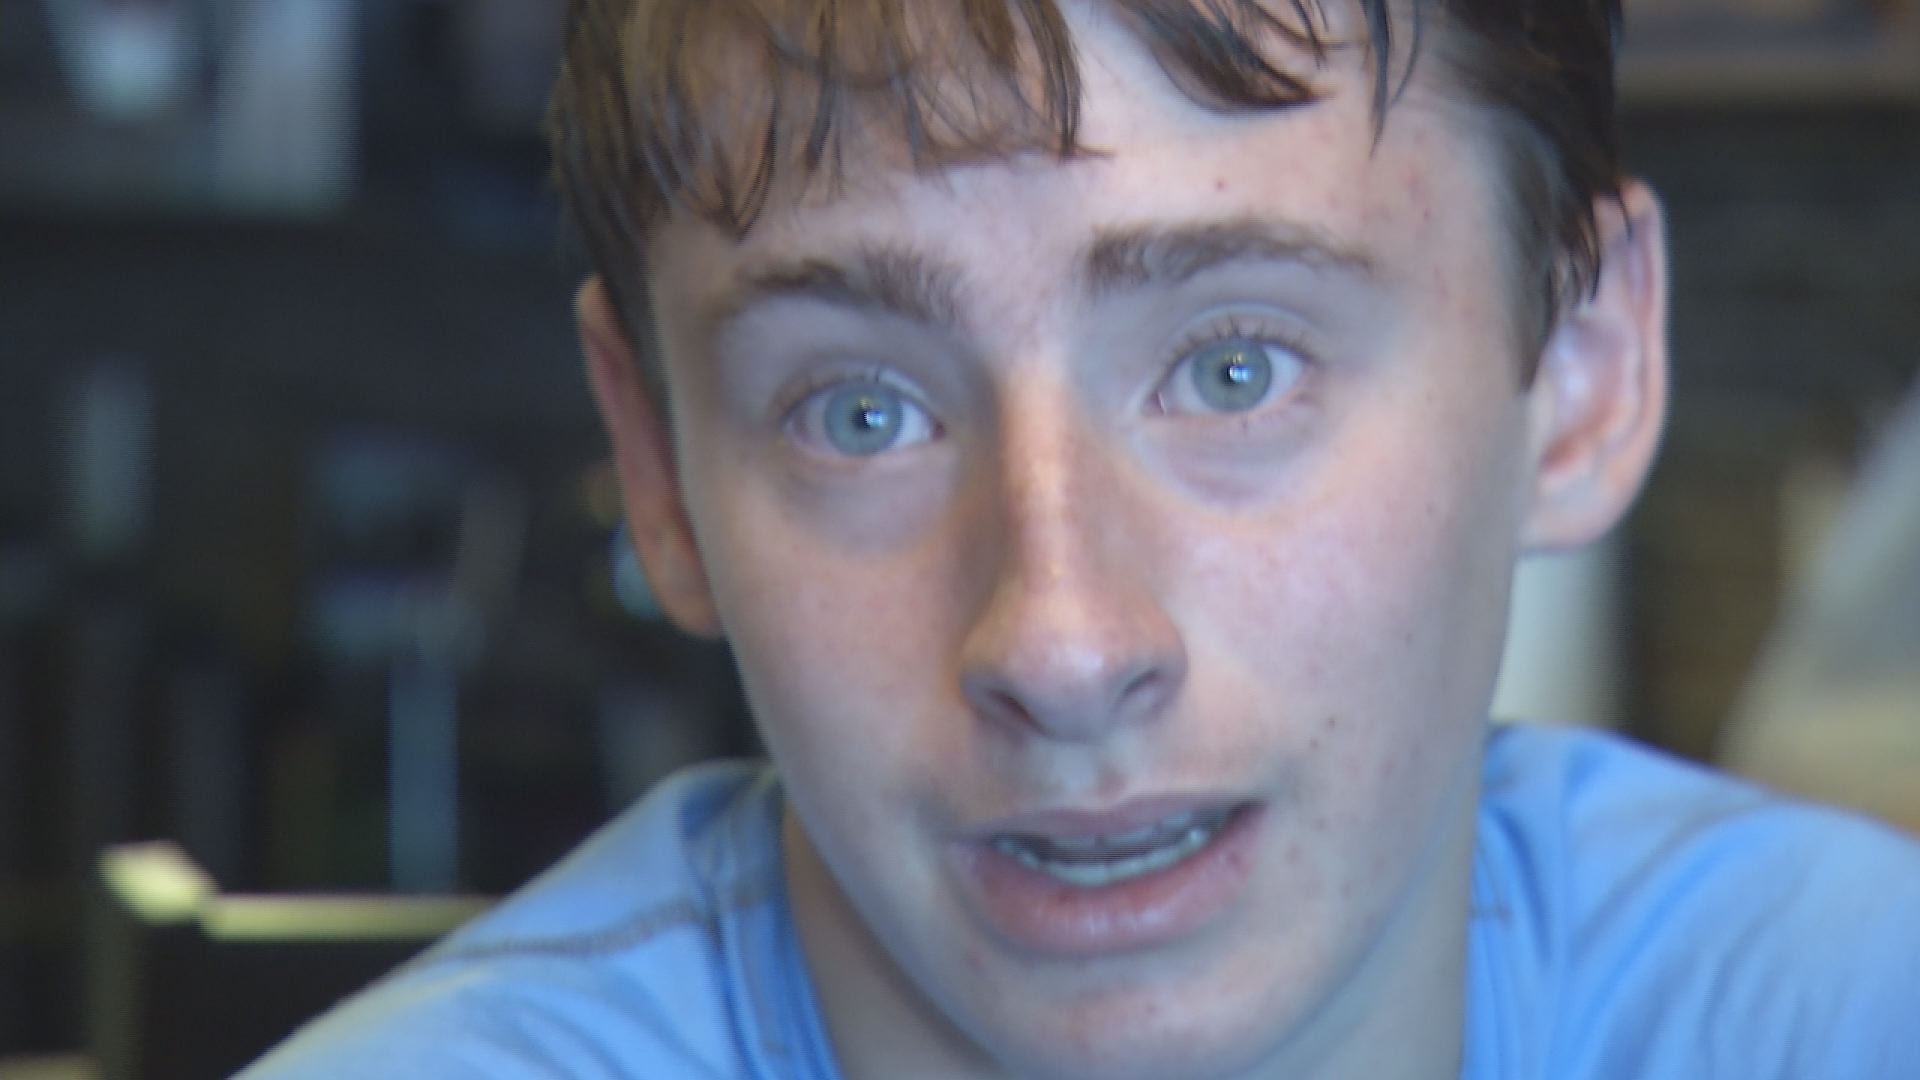 15-Year-Old Iowa Boy Running For President, Polling Well as "Deez Nuts